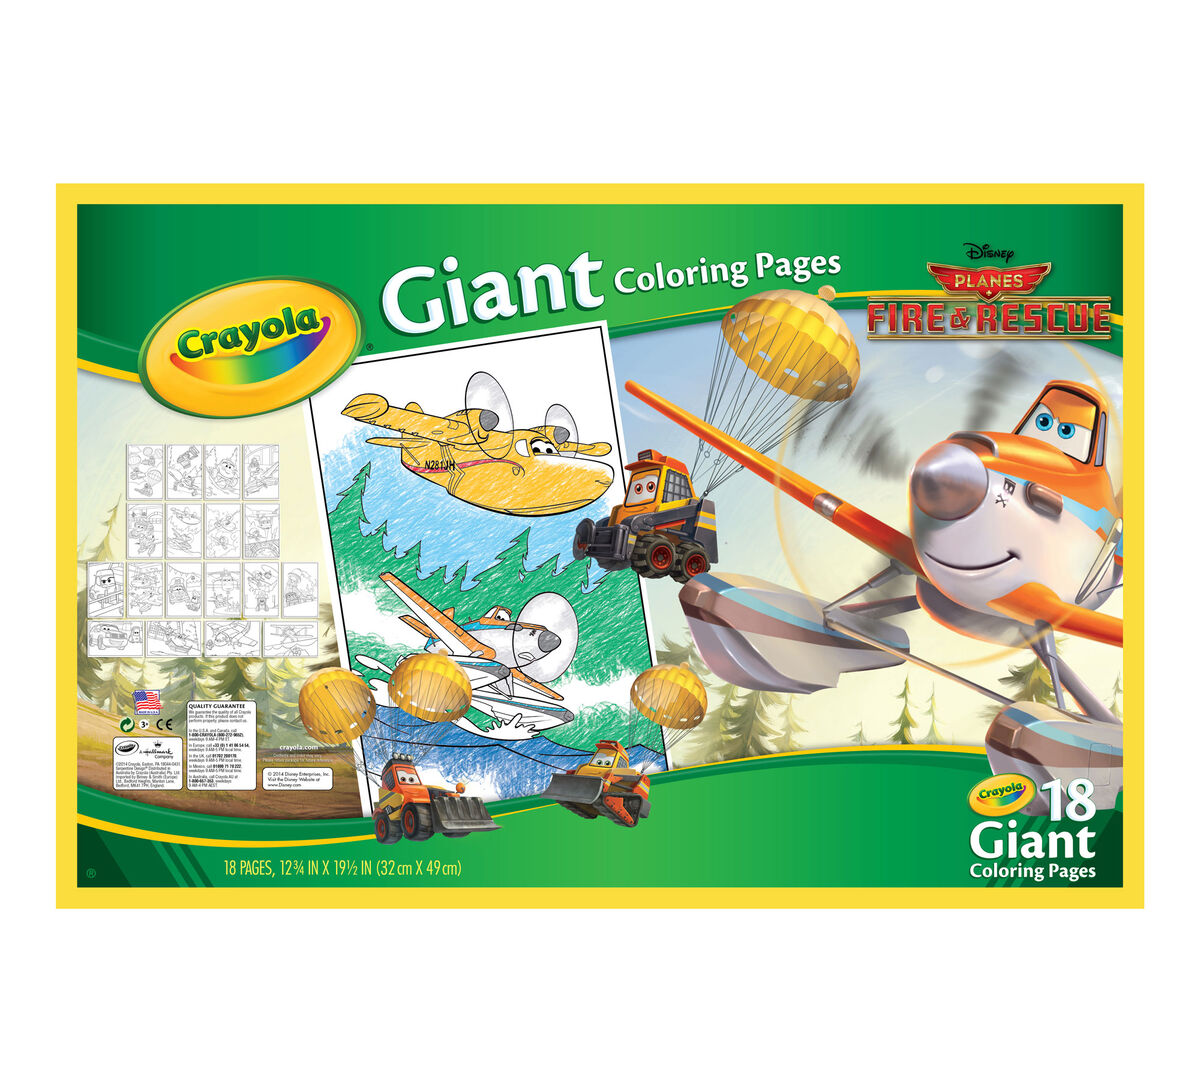 Giant Coloring Pages - Planes | Crayola